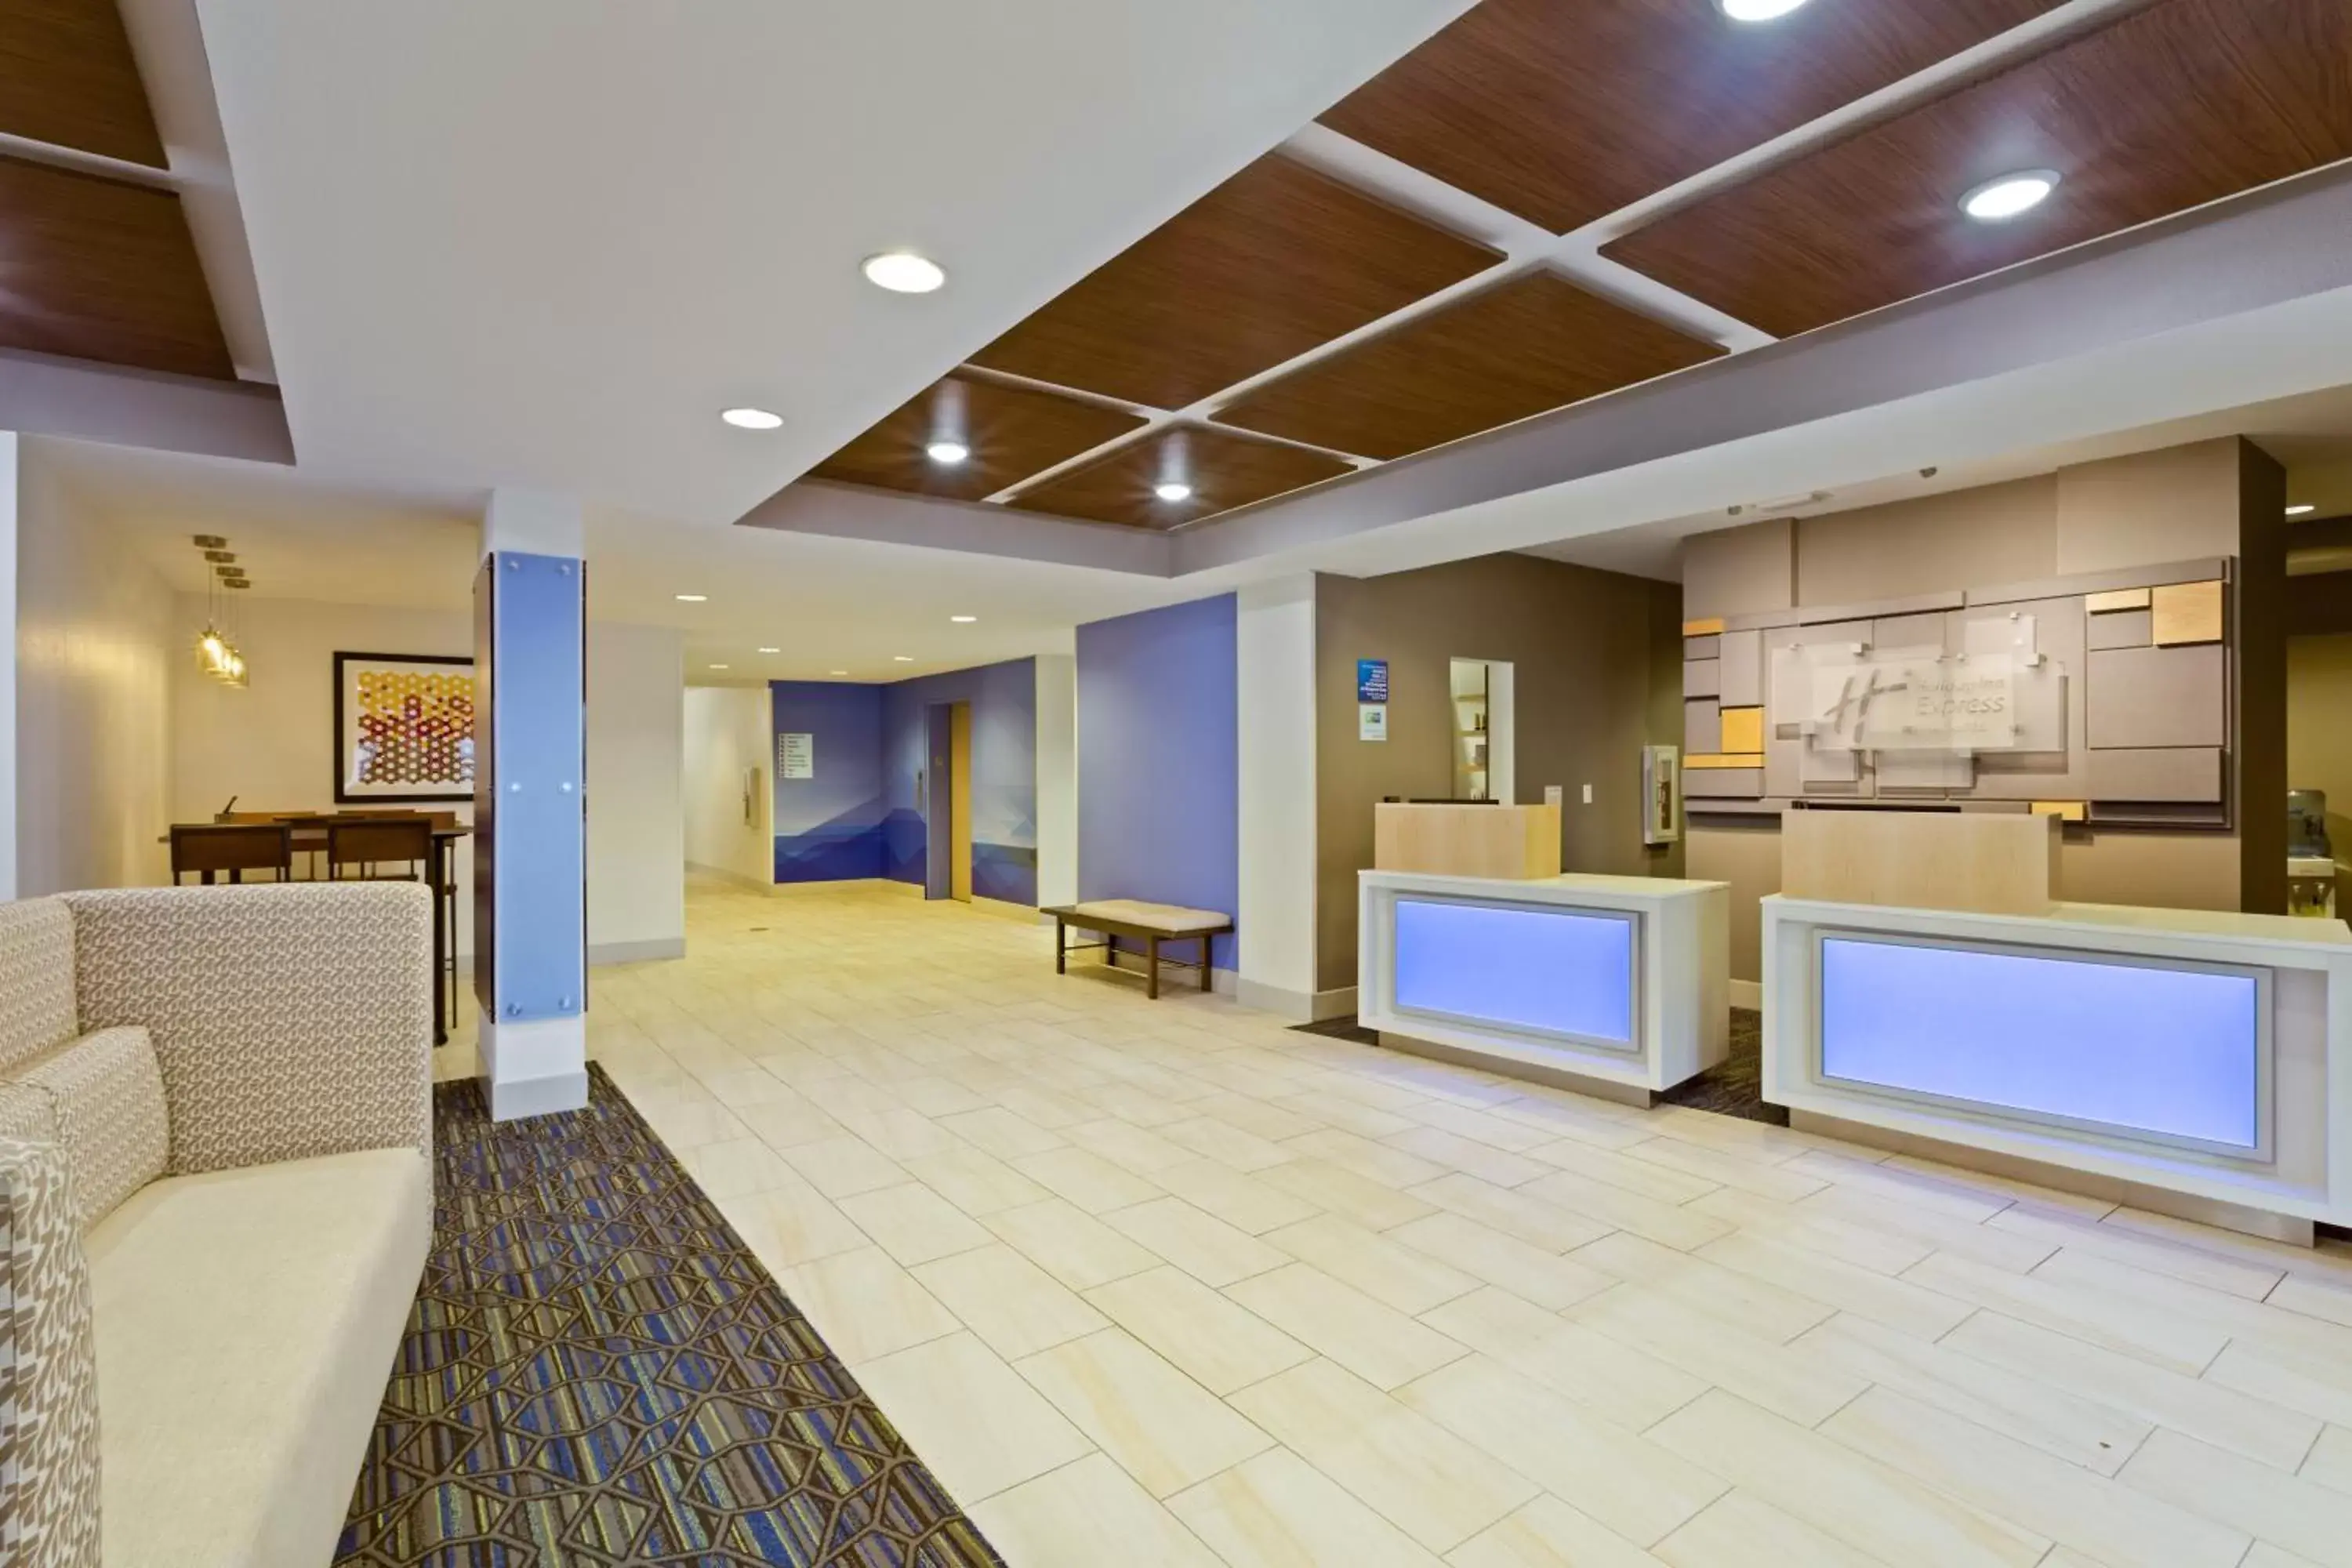 Property building in Holiday Inn Express & Suites Tavares, an IHG Hotel